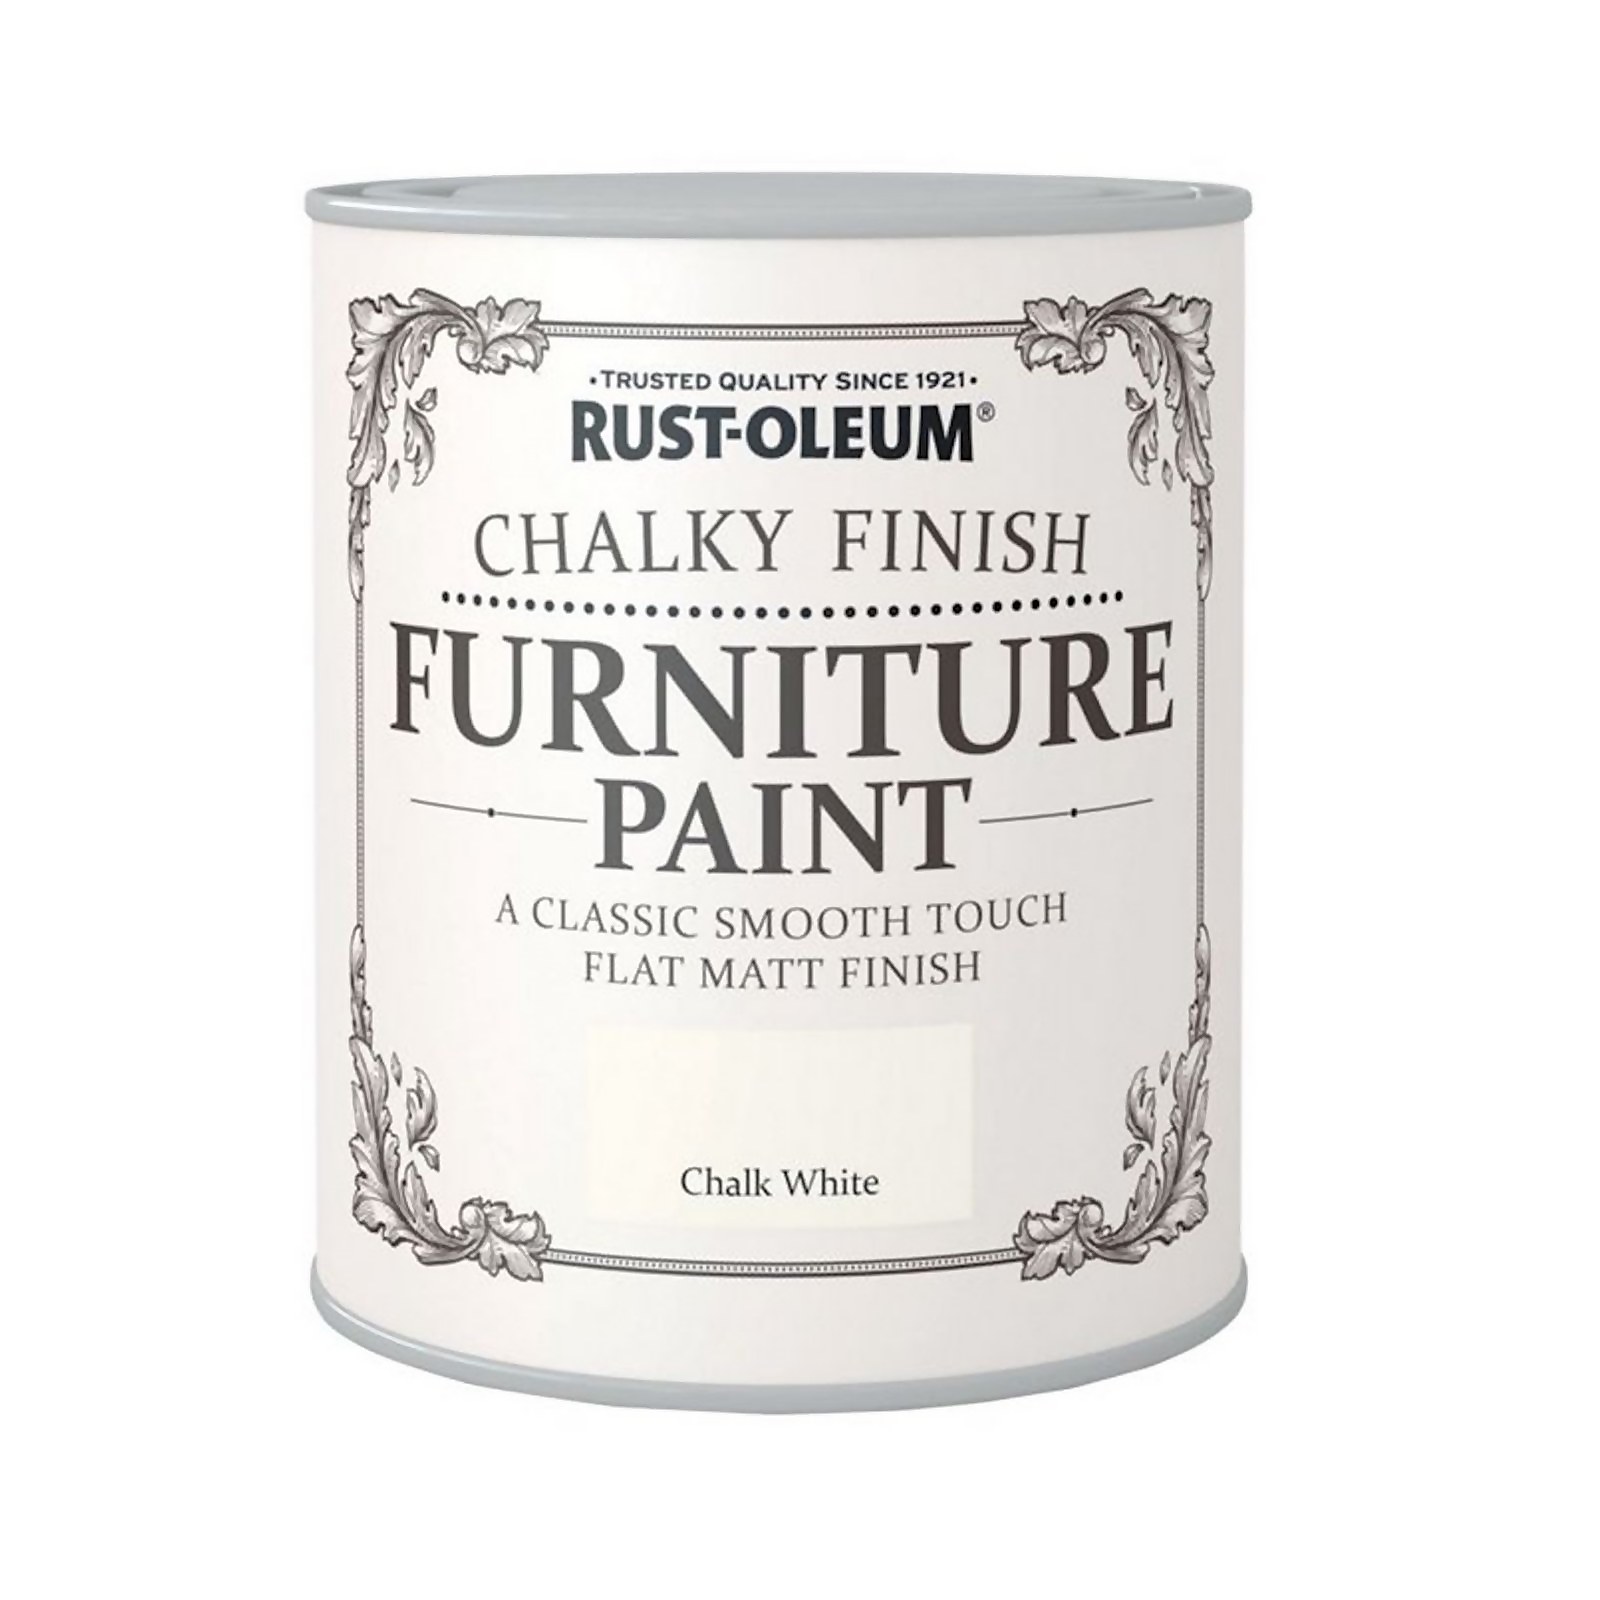 Photo of Rust-oleum Chalky Furniture Paint - Chalk White - 125ml